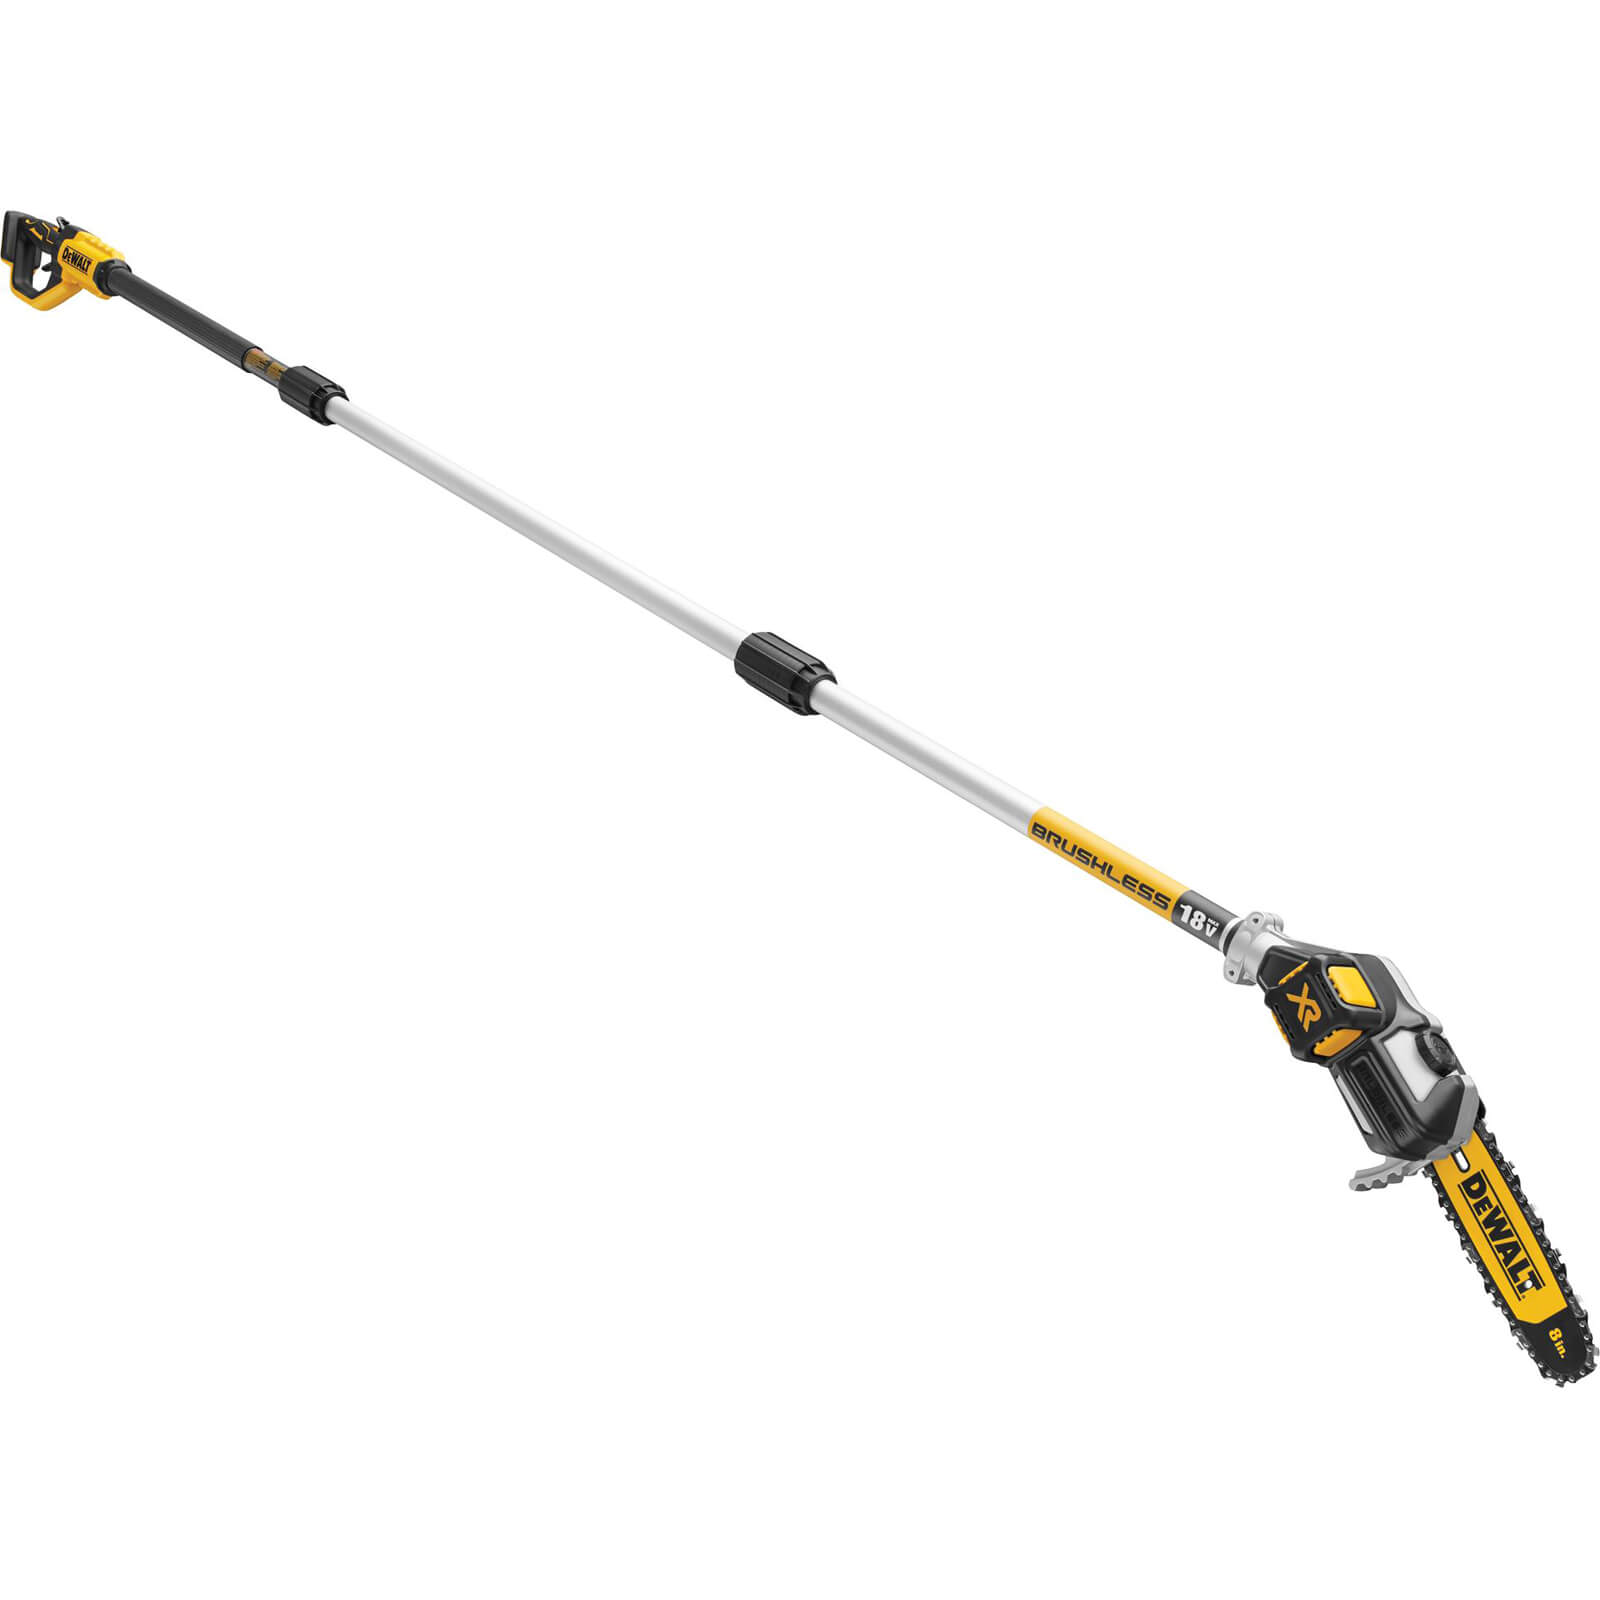 DeWalt DCMPS567 18v XR Brushless Cordless Pole Chain Saw 200mm No Batteries No Charger